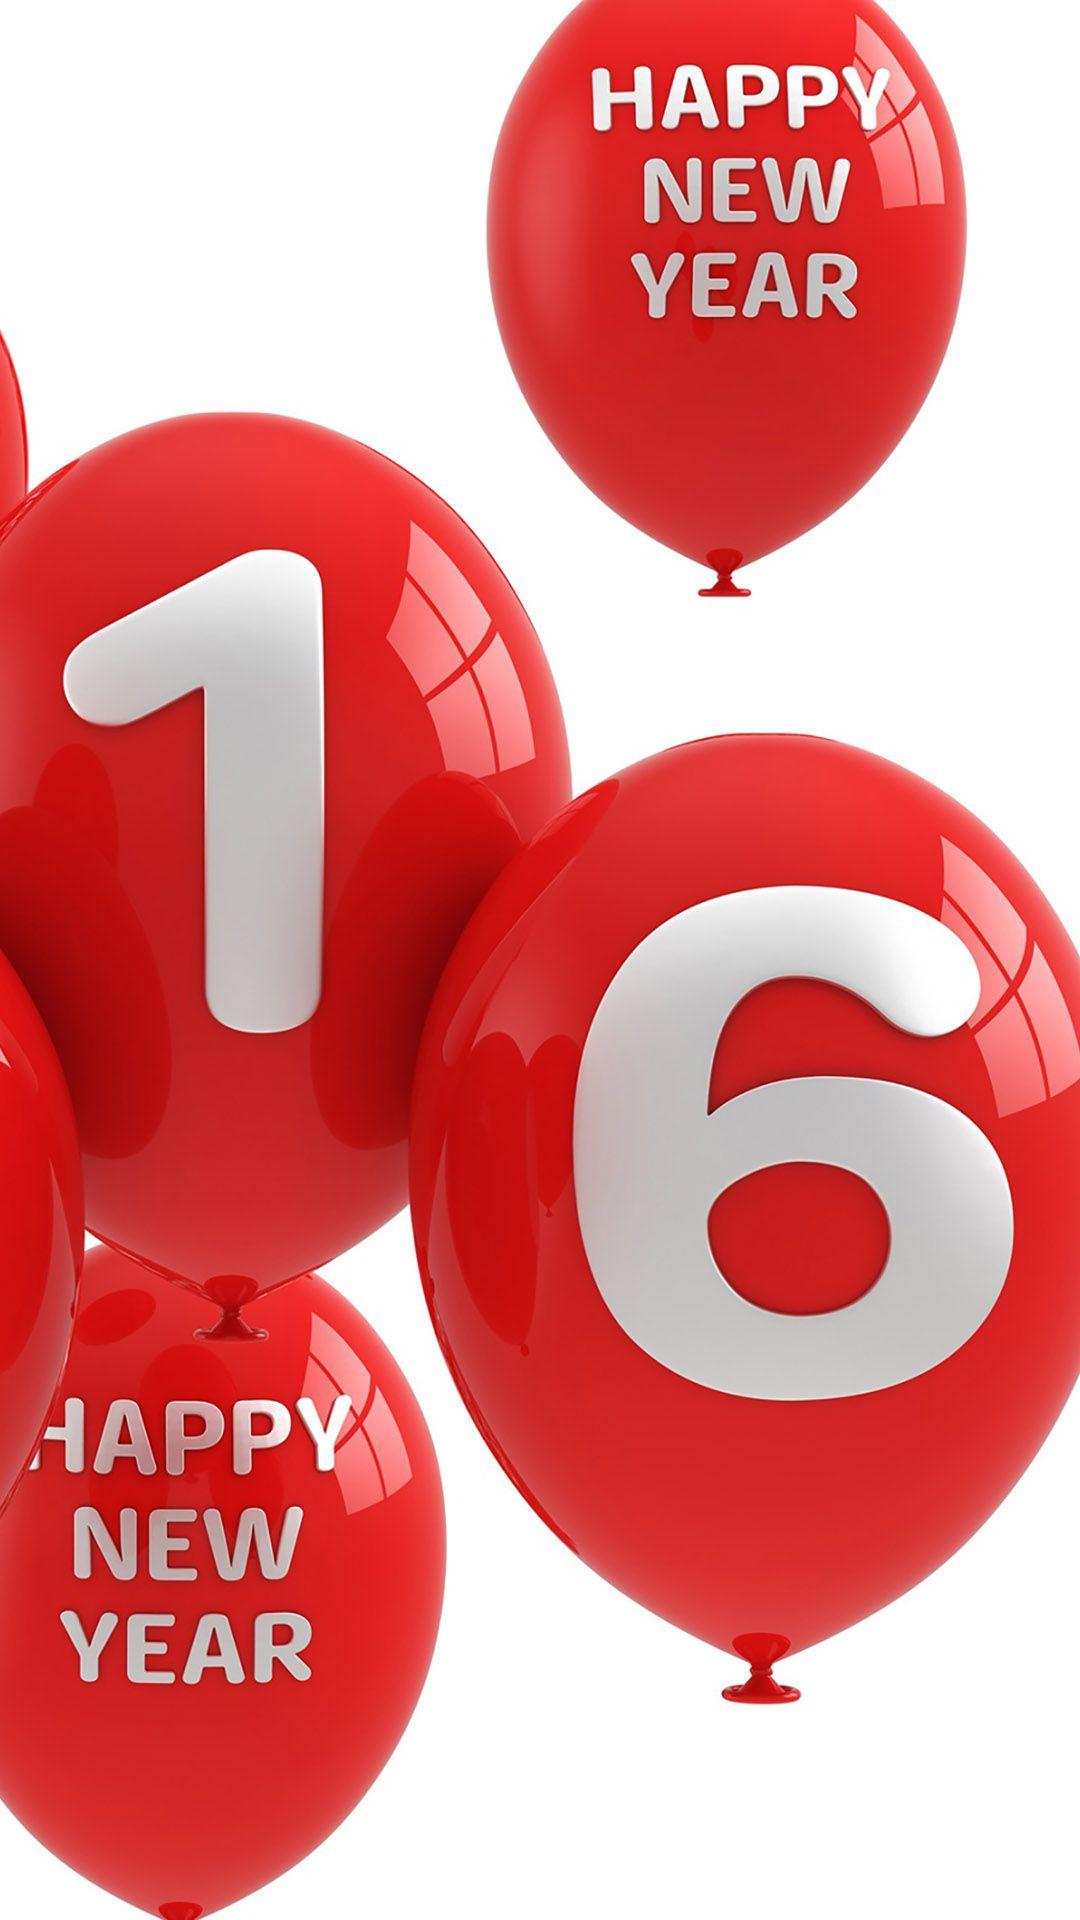 Happy New Year 2016 Balloons Red Greeting HD Wallpaper